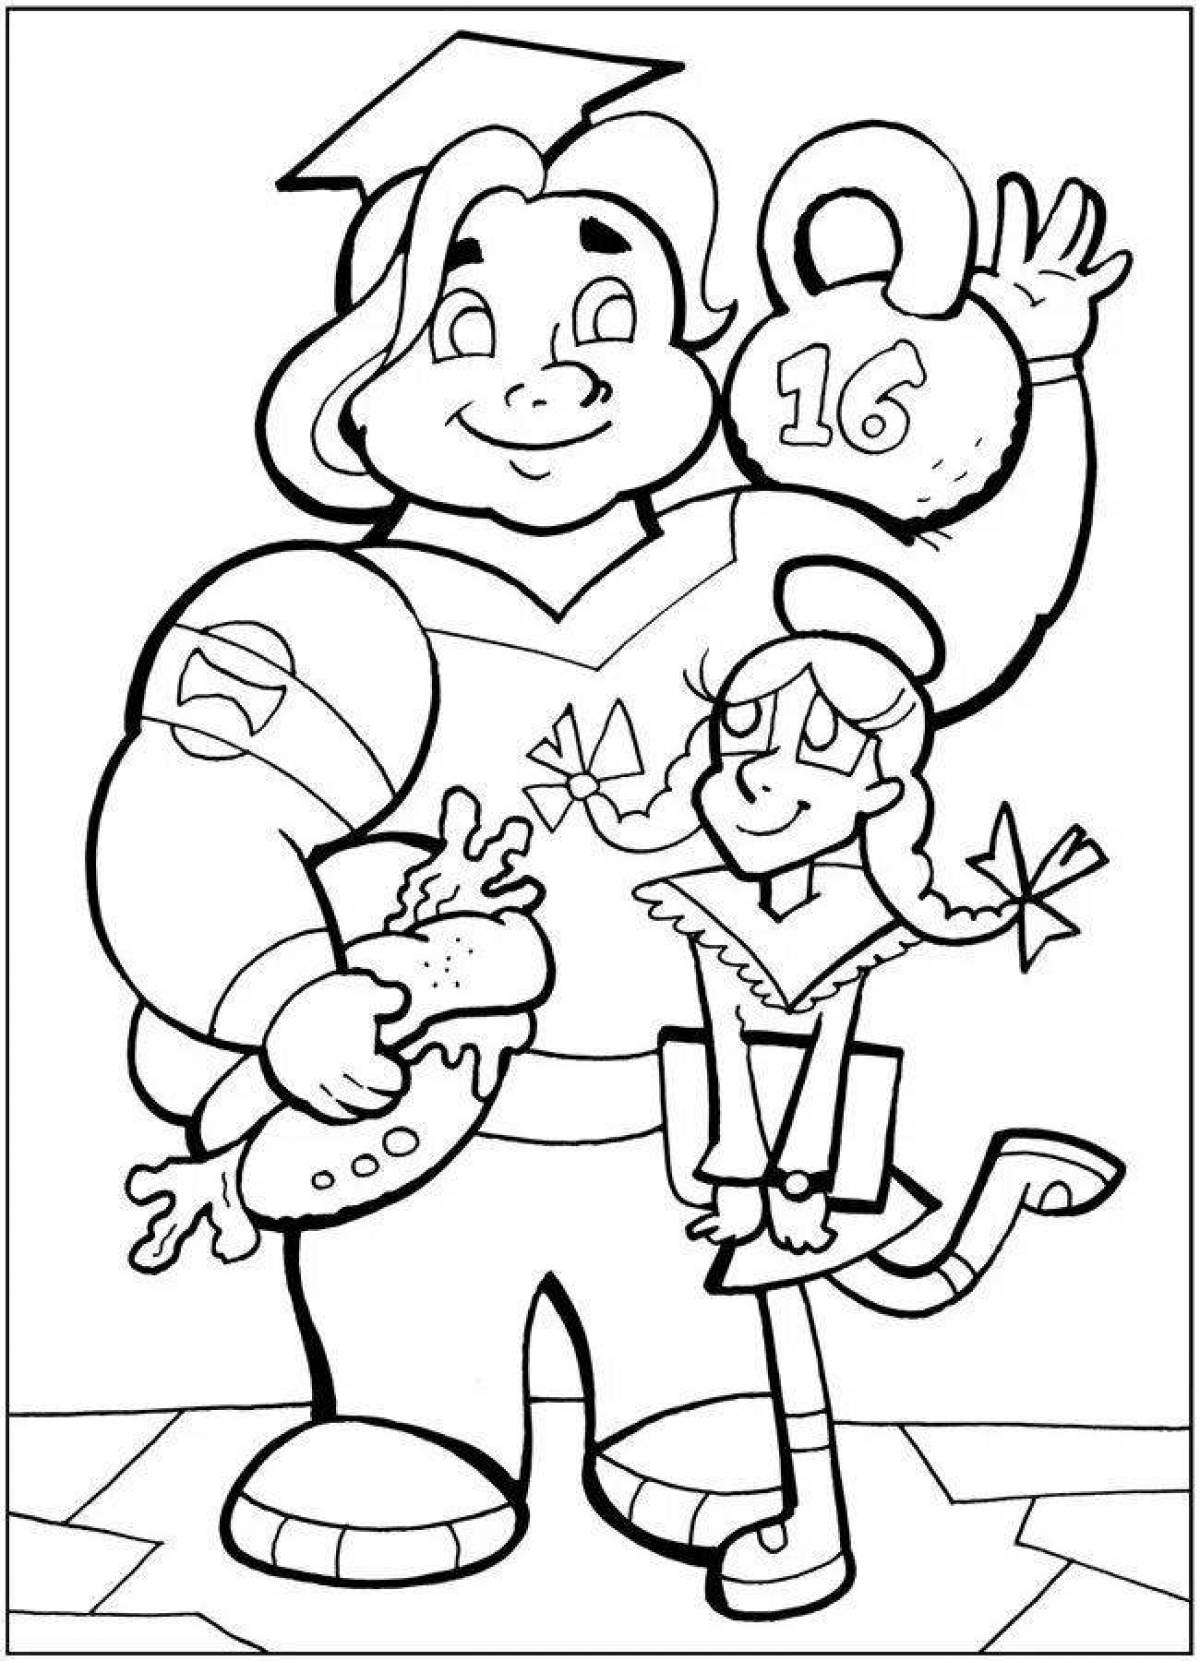 Glowing daddy's daughter coloring book